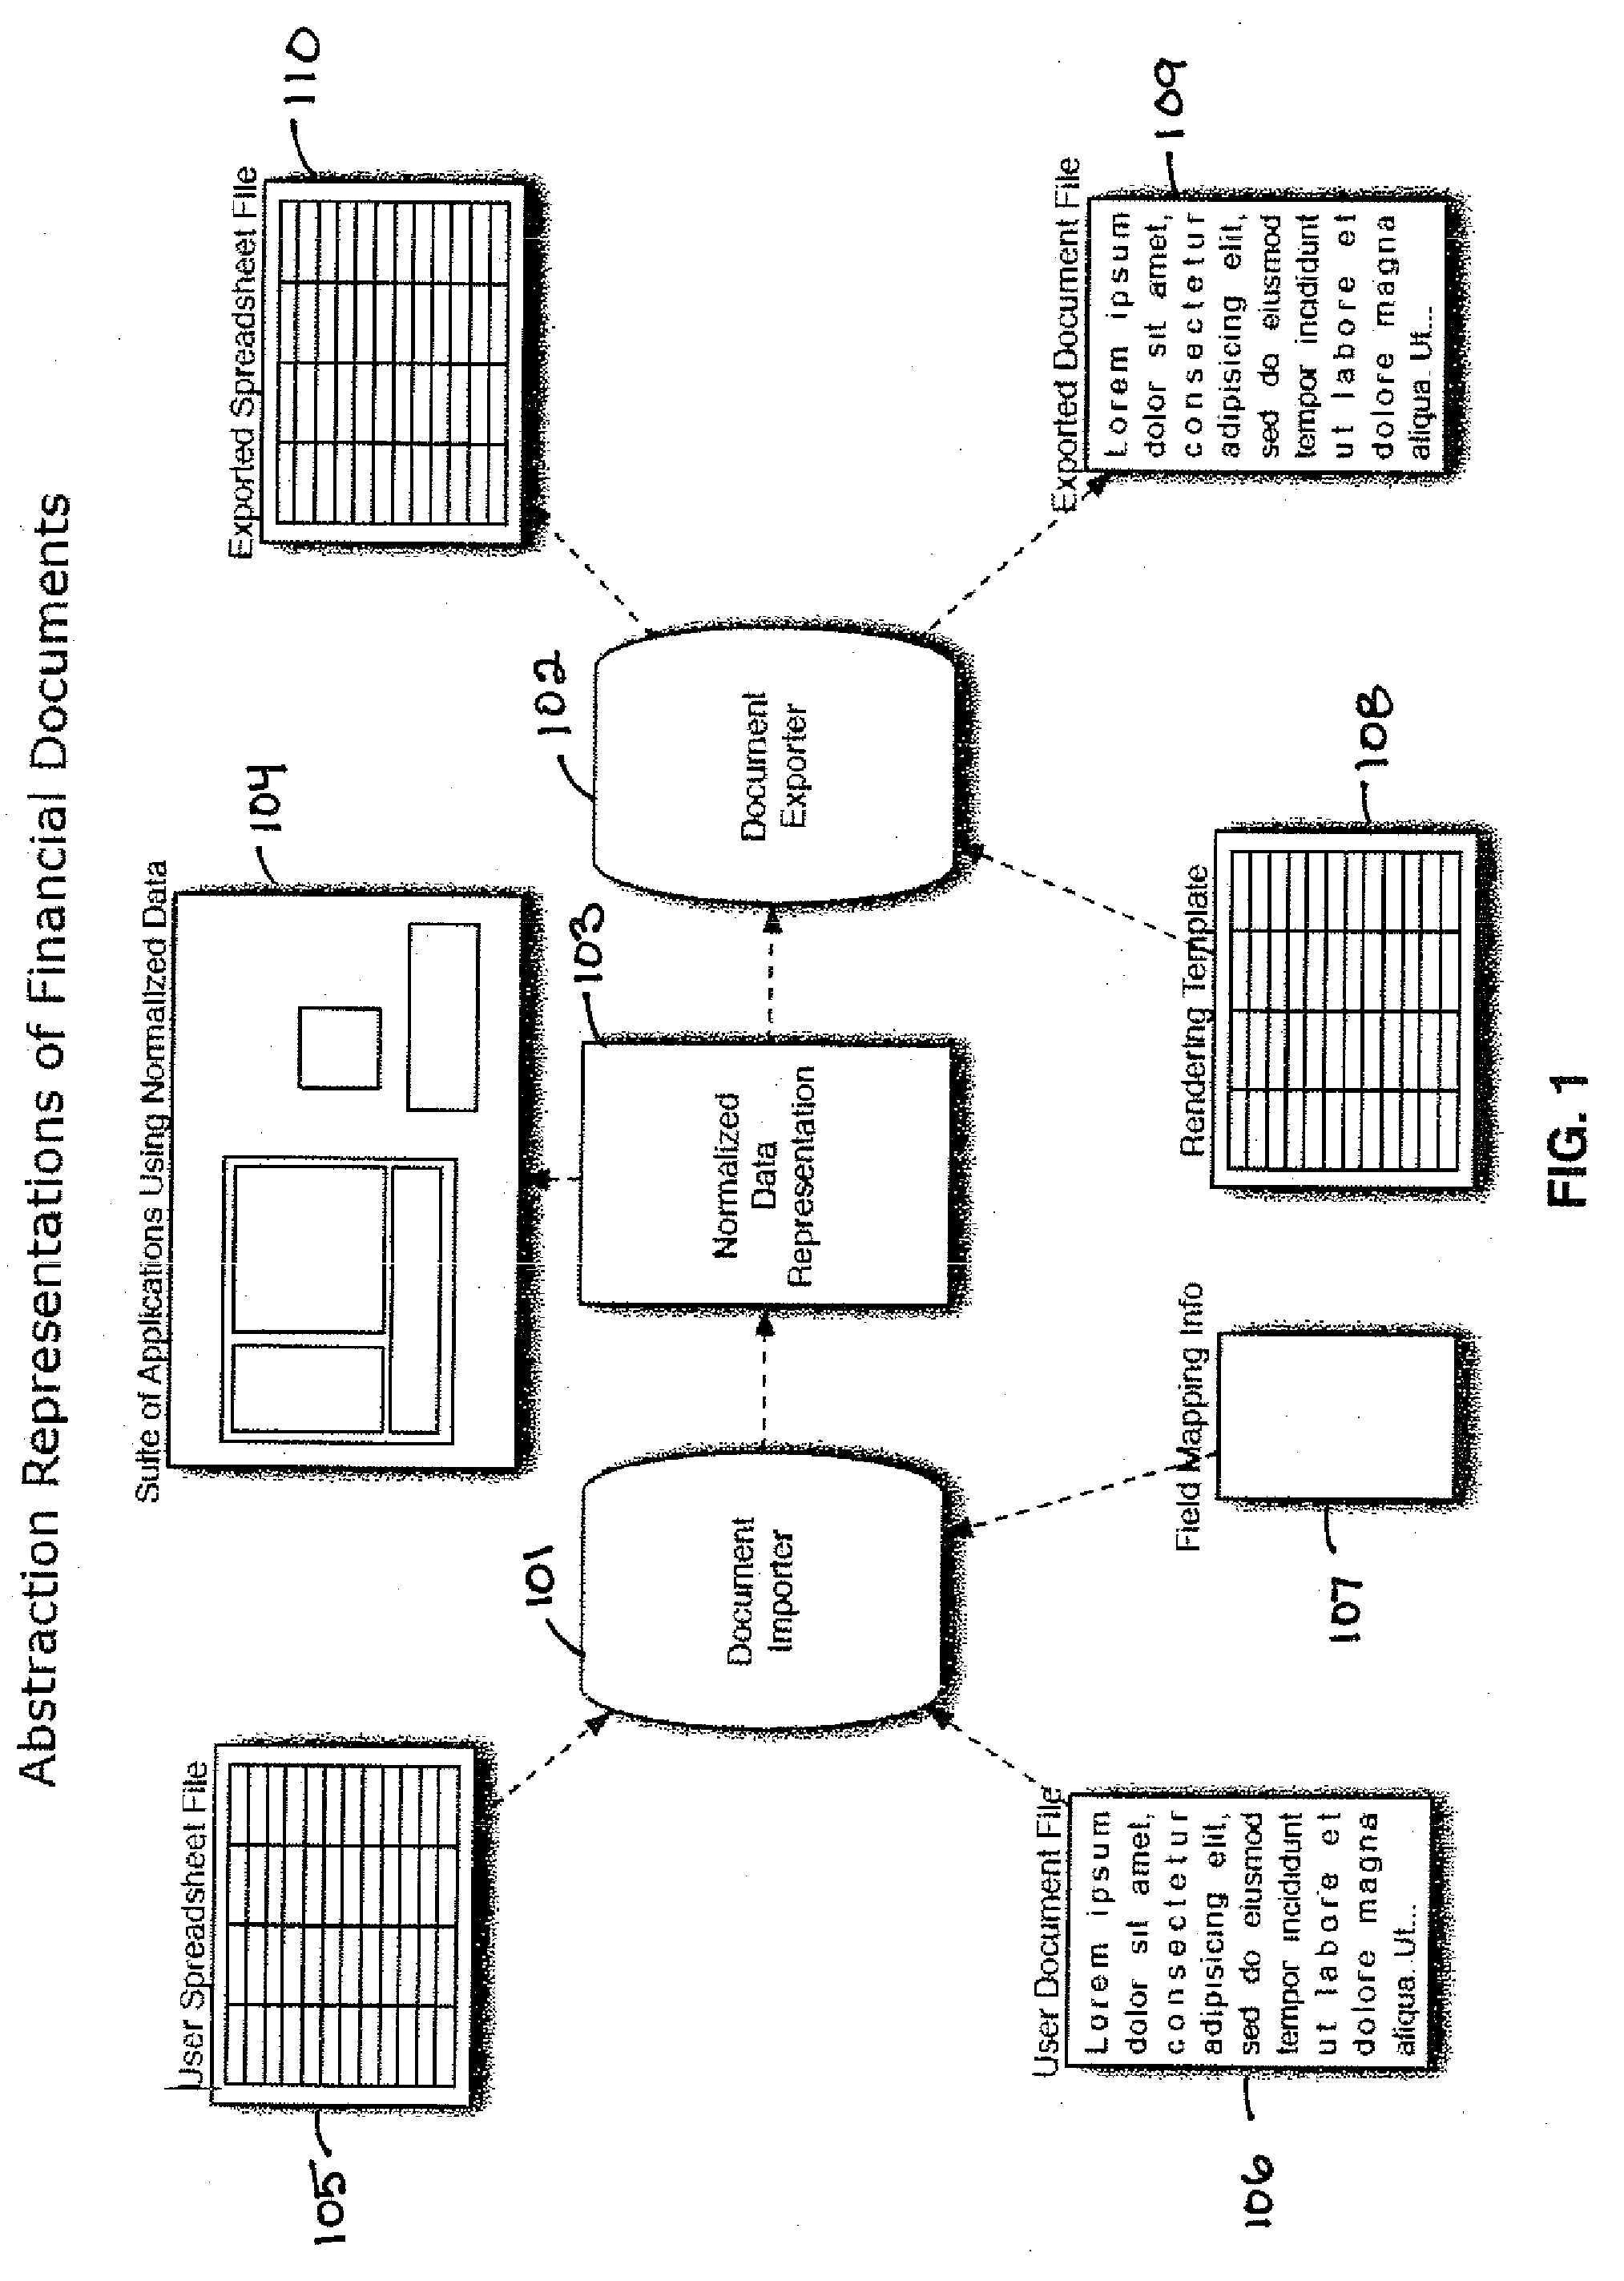 Methods and Apparatuses For Abstract Representation of Financial Documents